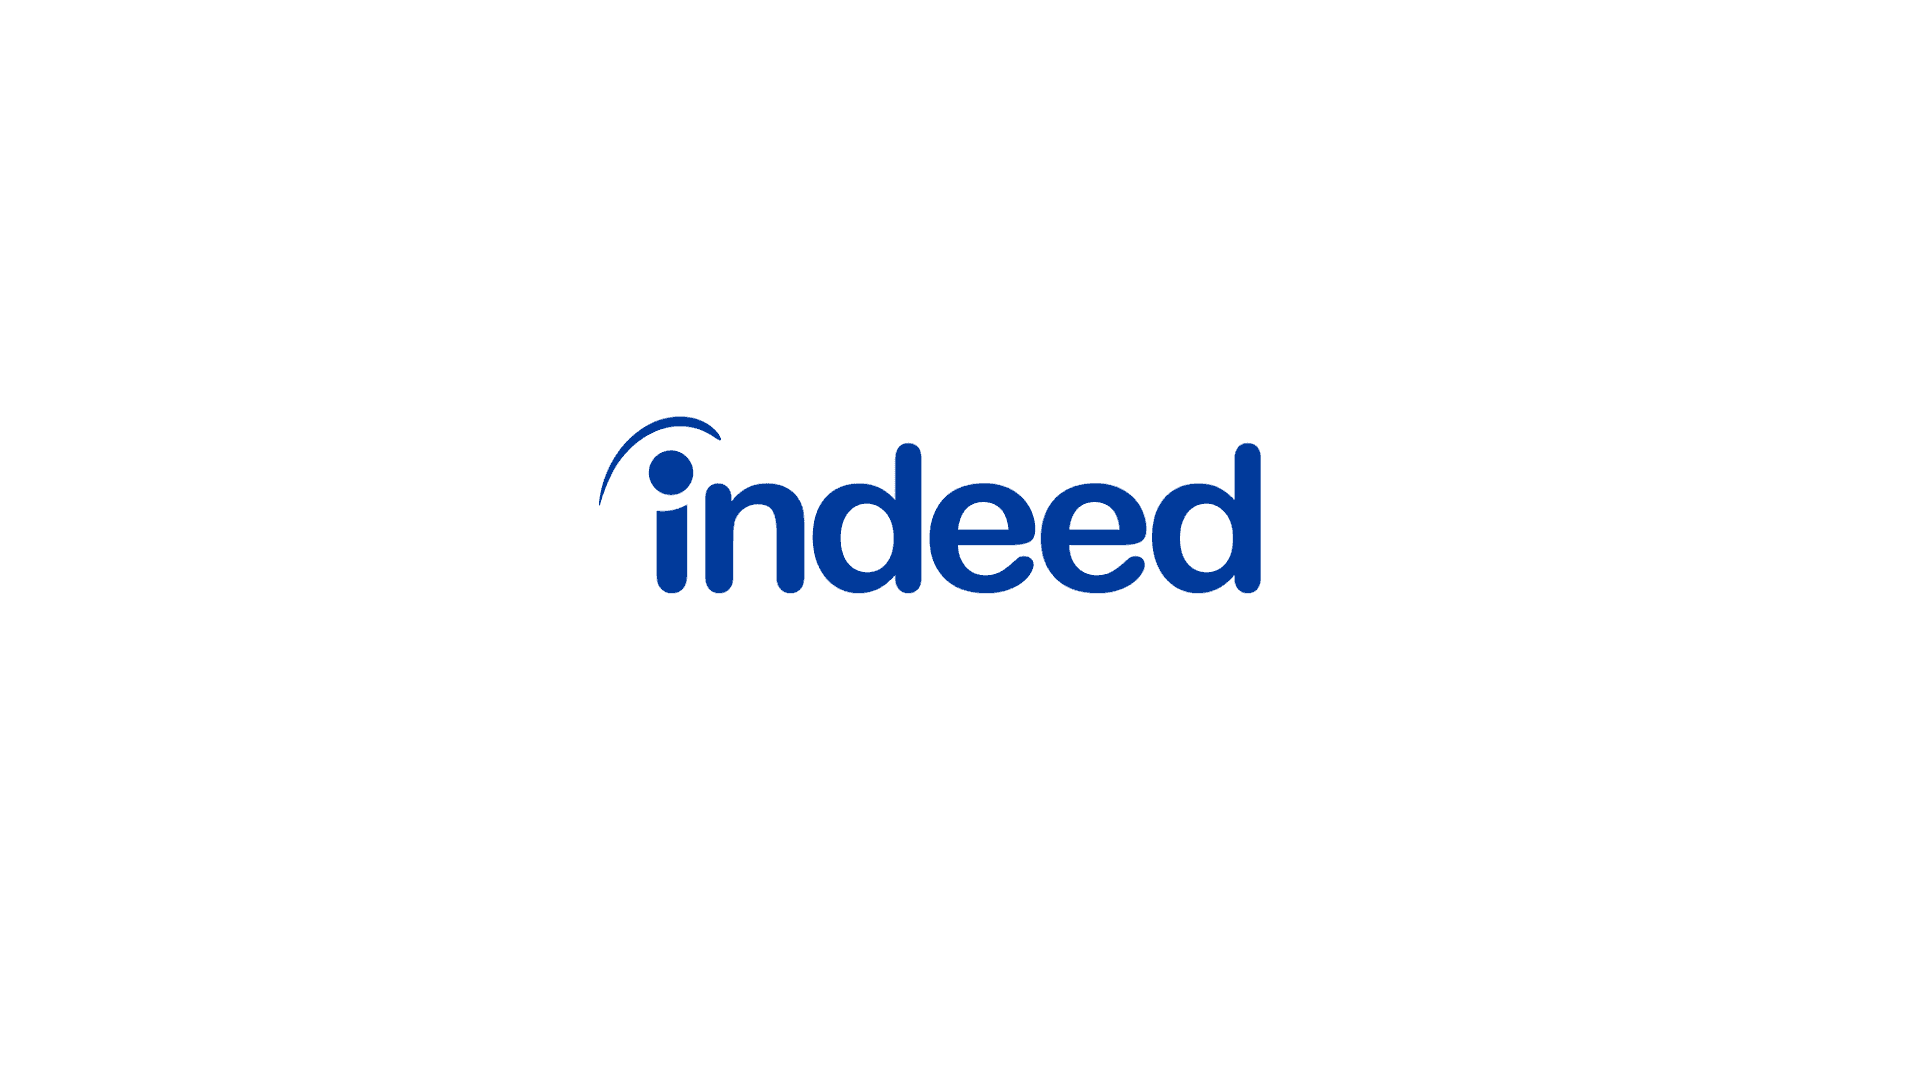 Indeed's logo and icon Indeed Design